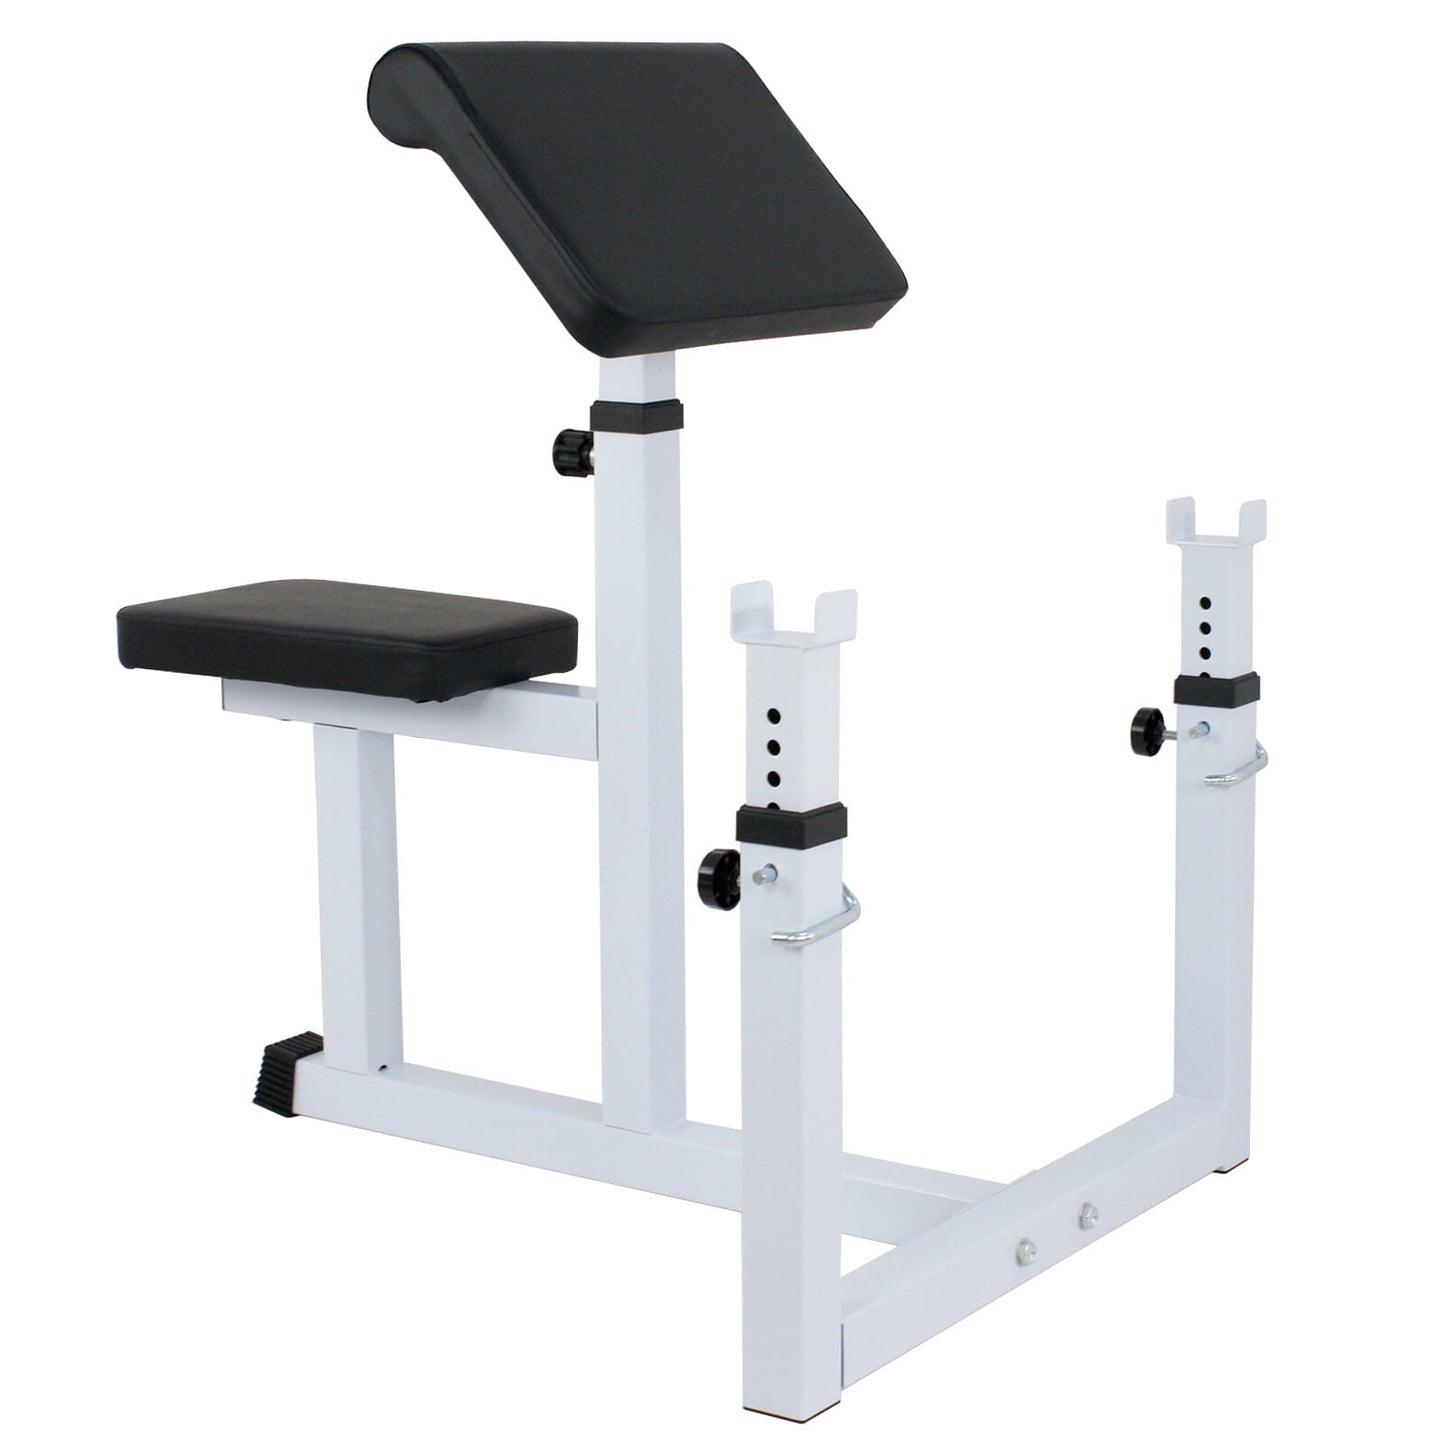 ZenSports Adjustable Preacher Curl Bench Bicep Curl Weight Bench Max.550lbs Home Gym Fitness Equipment